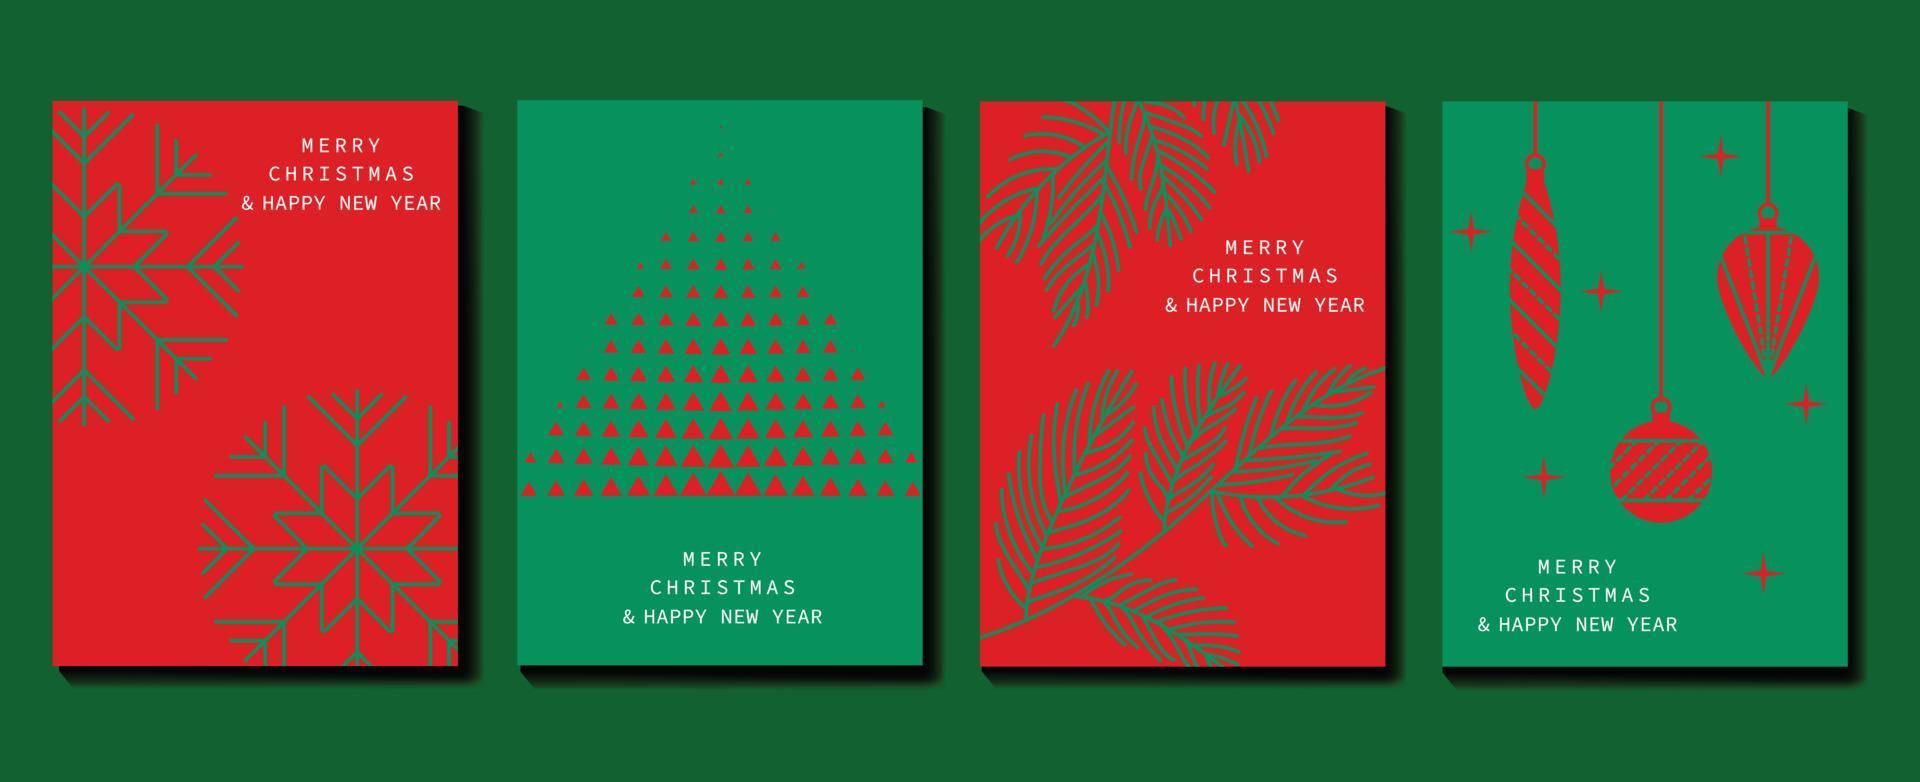 Set of christmas and happy new year holiday card vector. Red and green element of snowflake, triangle christmas tree, pine leaves, bauble balls. Design illustration for cover, banner, card, poster. vector